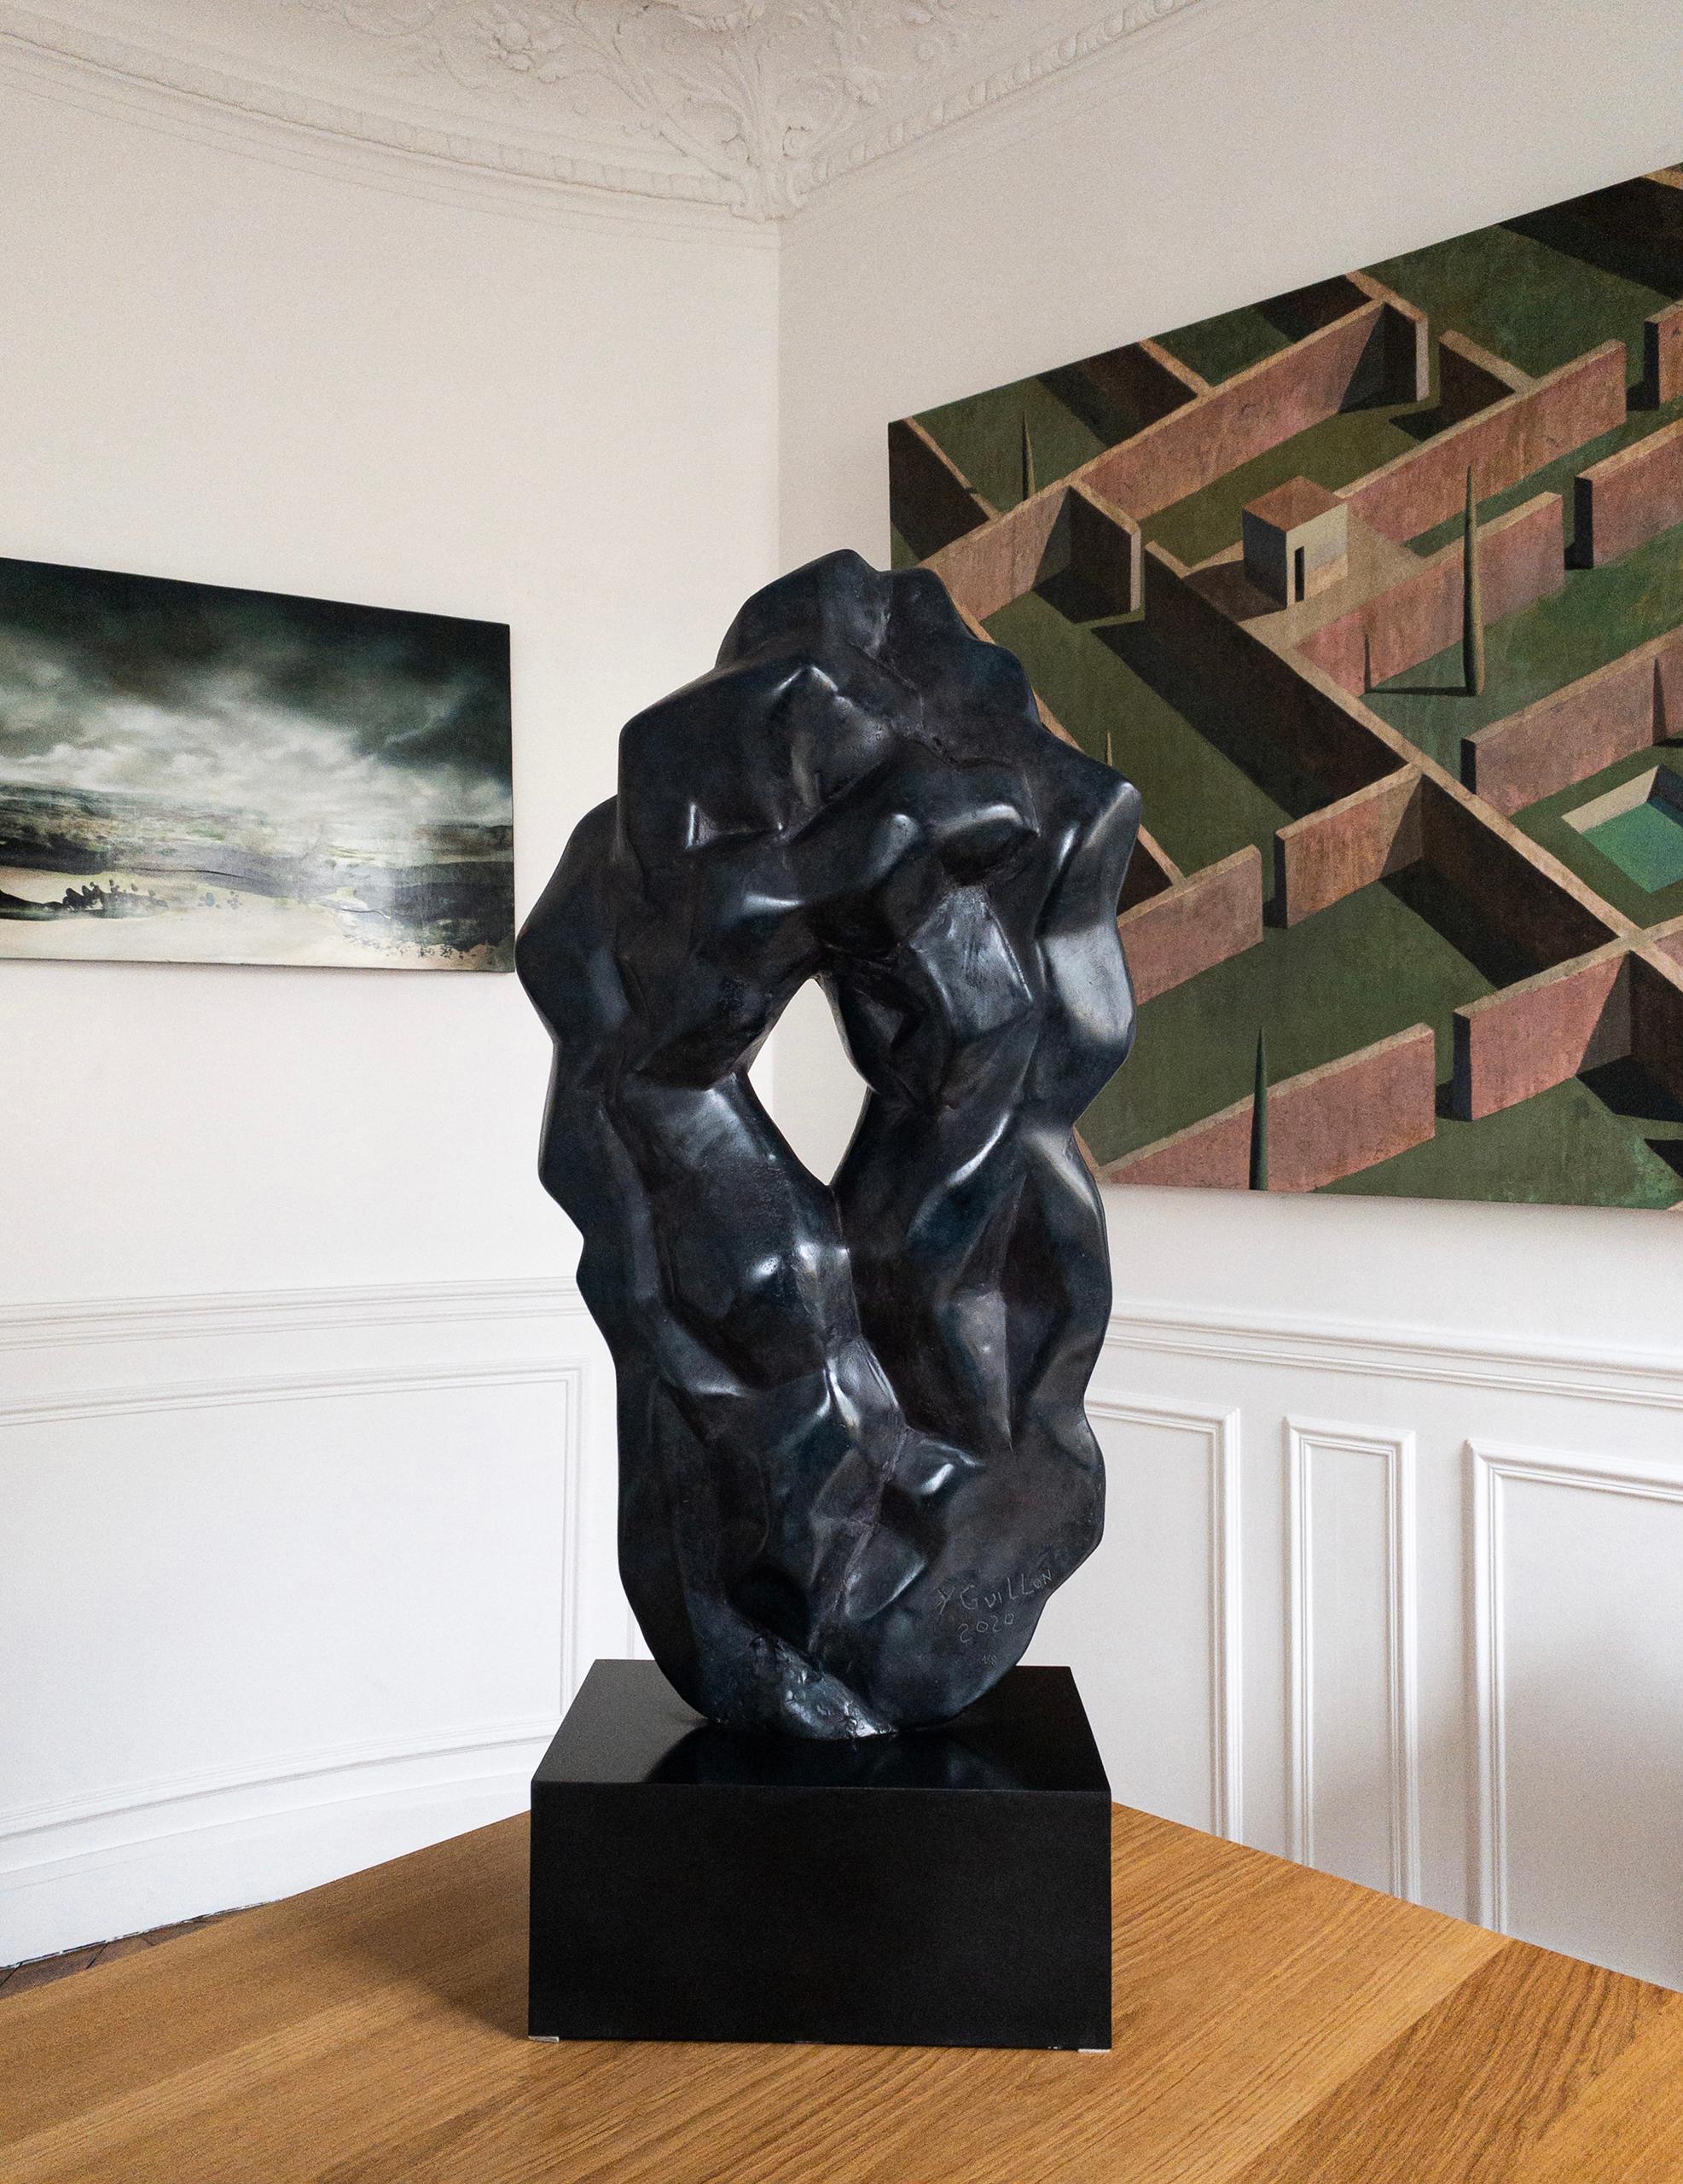 Limited edition of 8 + 4 artist's proofs. Each cast is signed and numbered. 
Sold with a granite base.
Dimensions of the bronze sculpture: 67 H x 37 L x 18 D cm
Dimensions of the base: 8 H x 33 L x 30 D cm